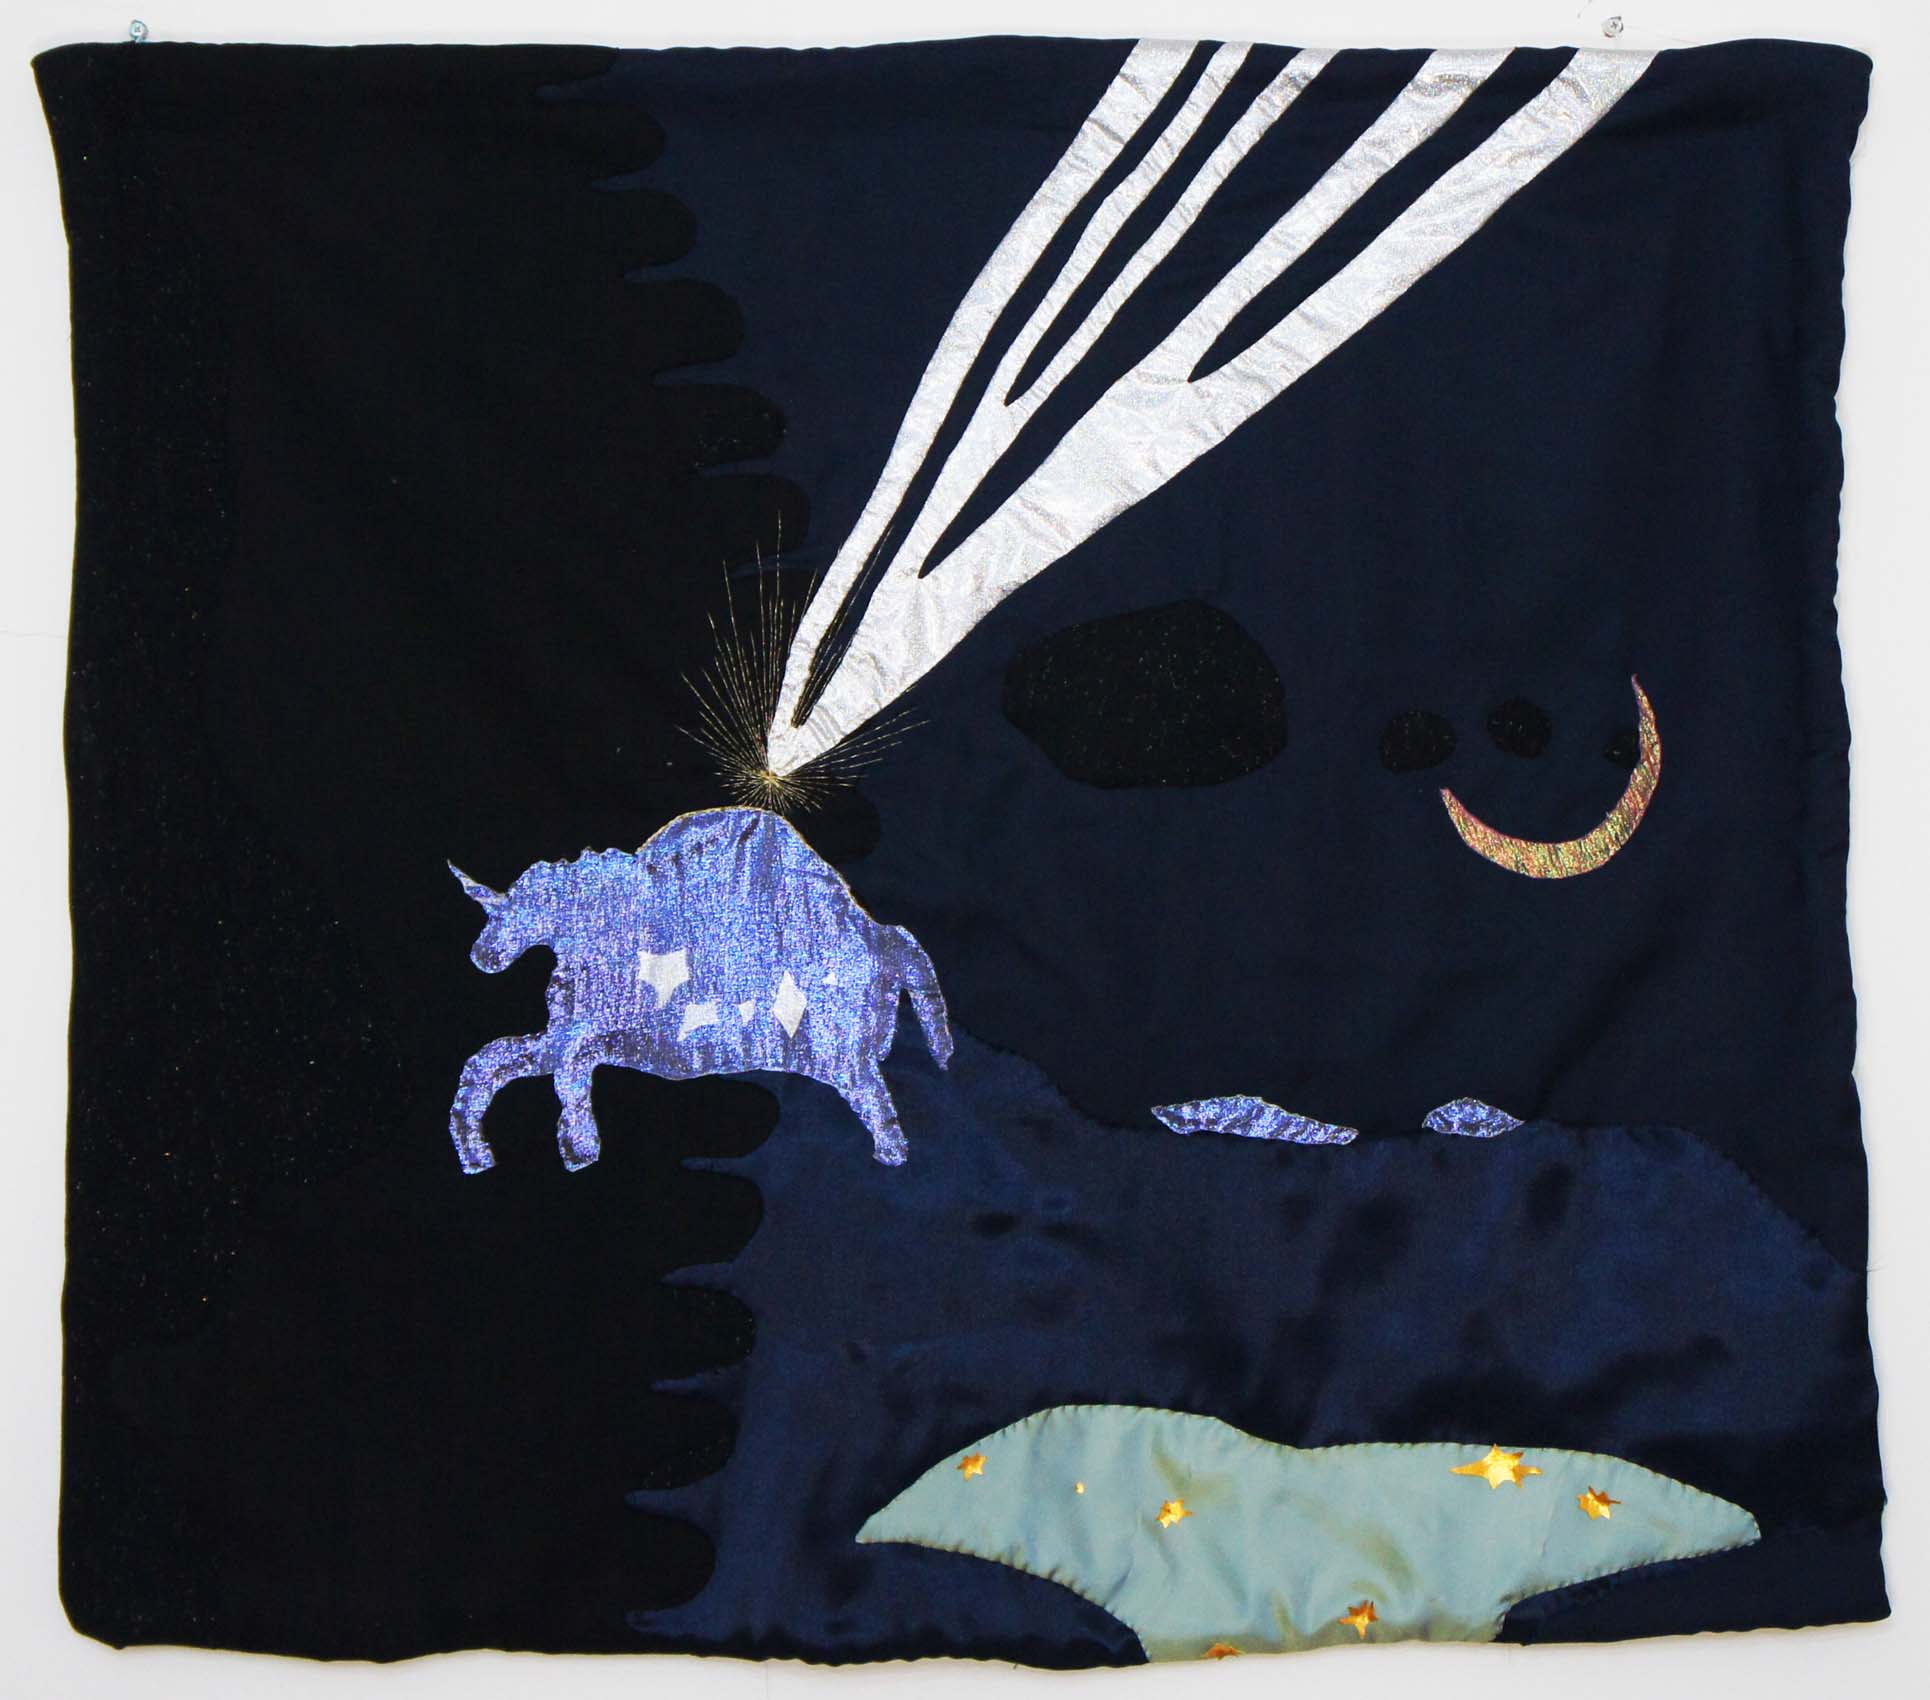 Cindy Lien, 跳舞星星與月亮 / 'Dancing stars and the moon', 2021, fabric, thread, plastic sequins. © Cindy Lien. Courtesy the artist